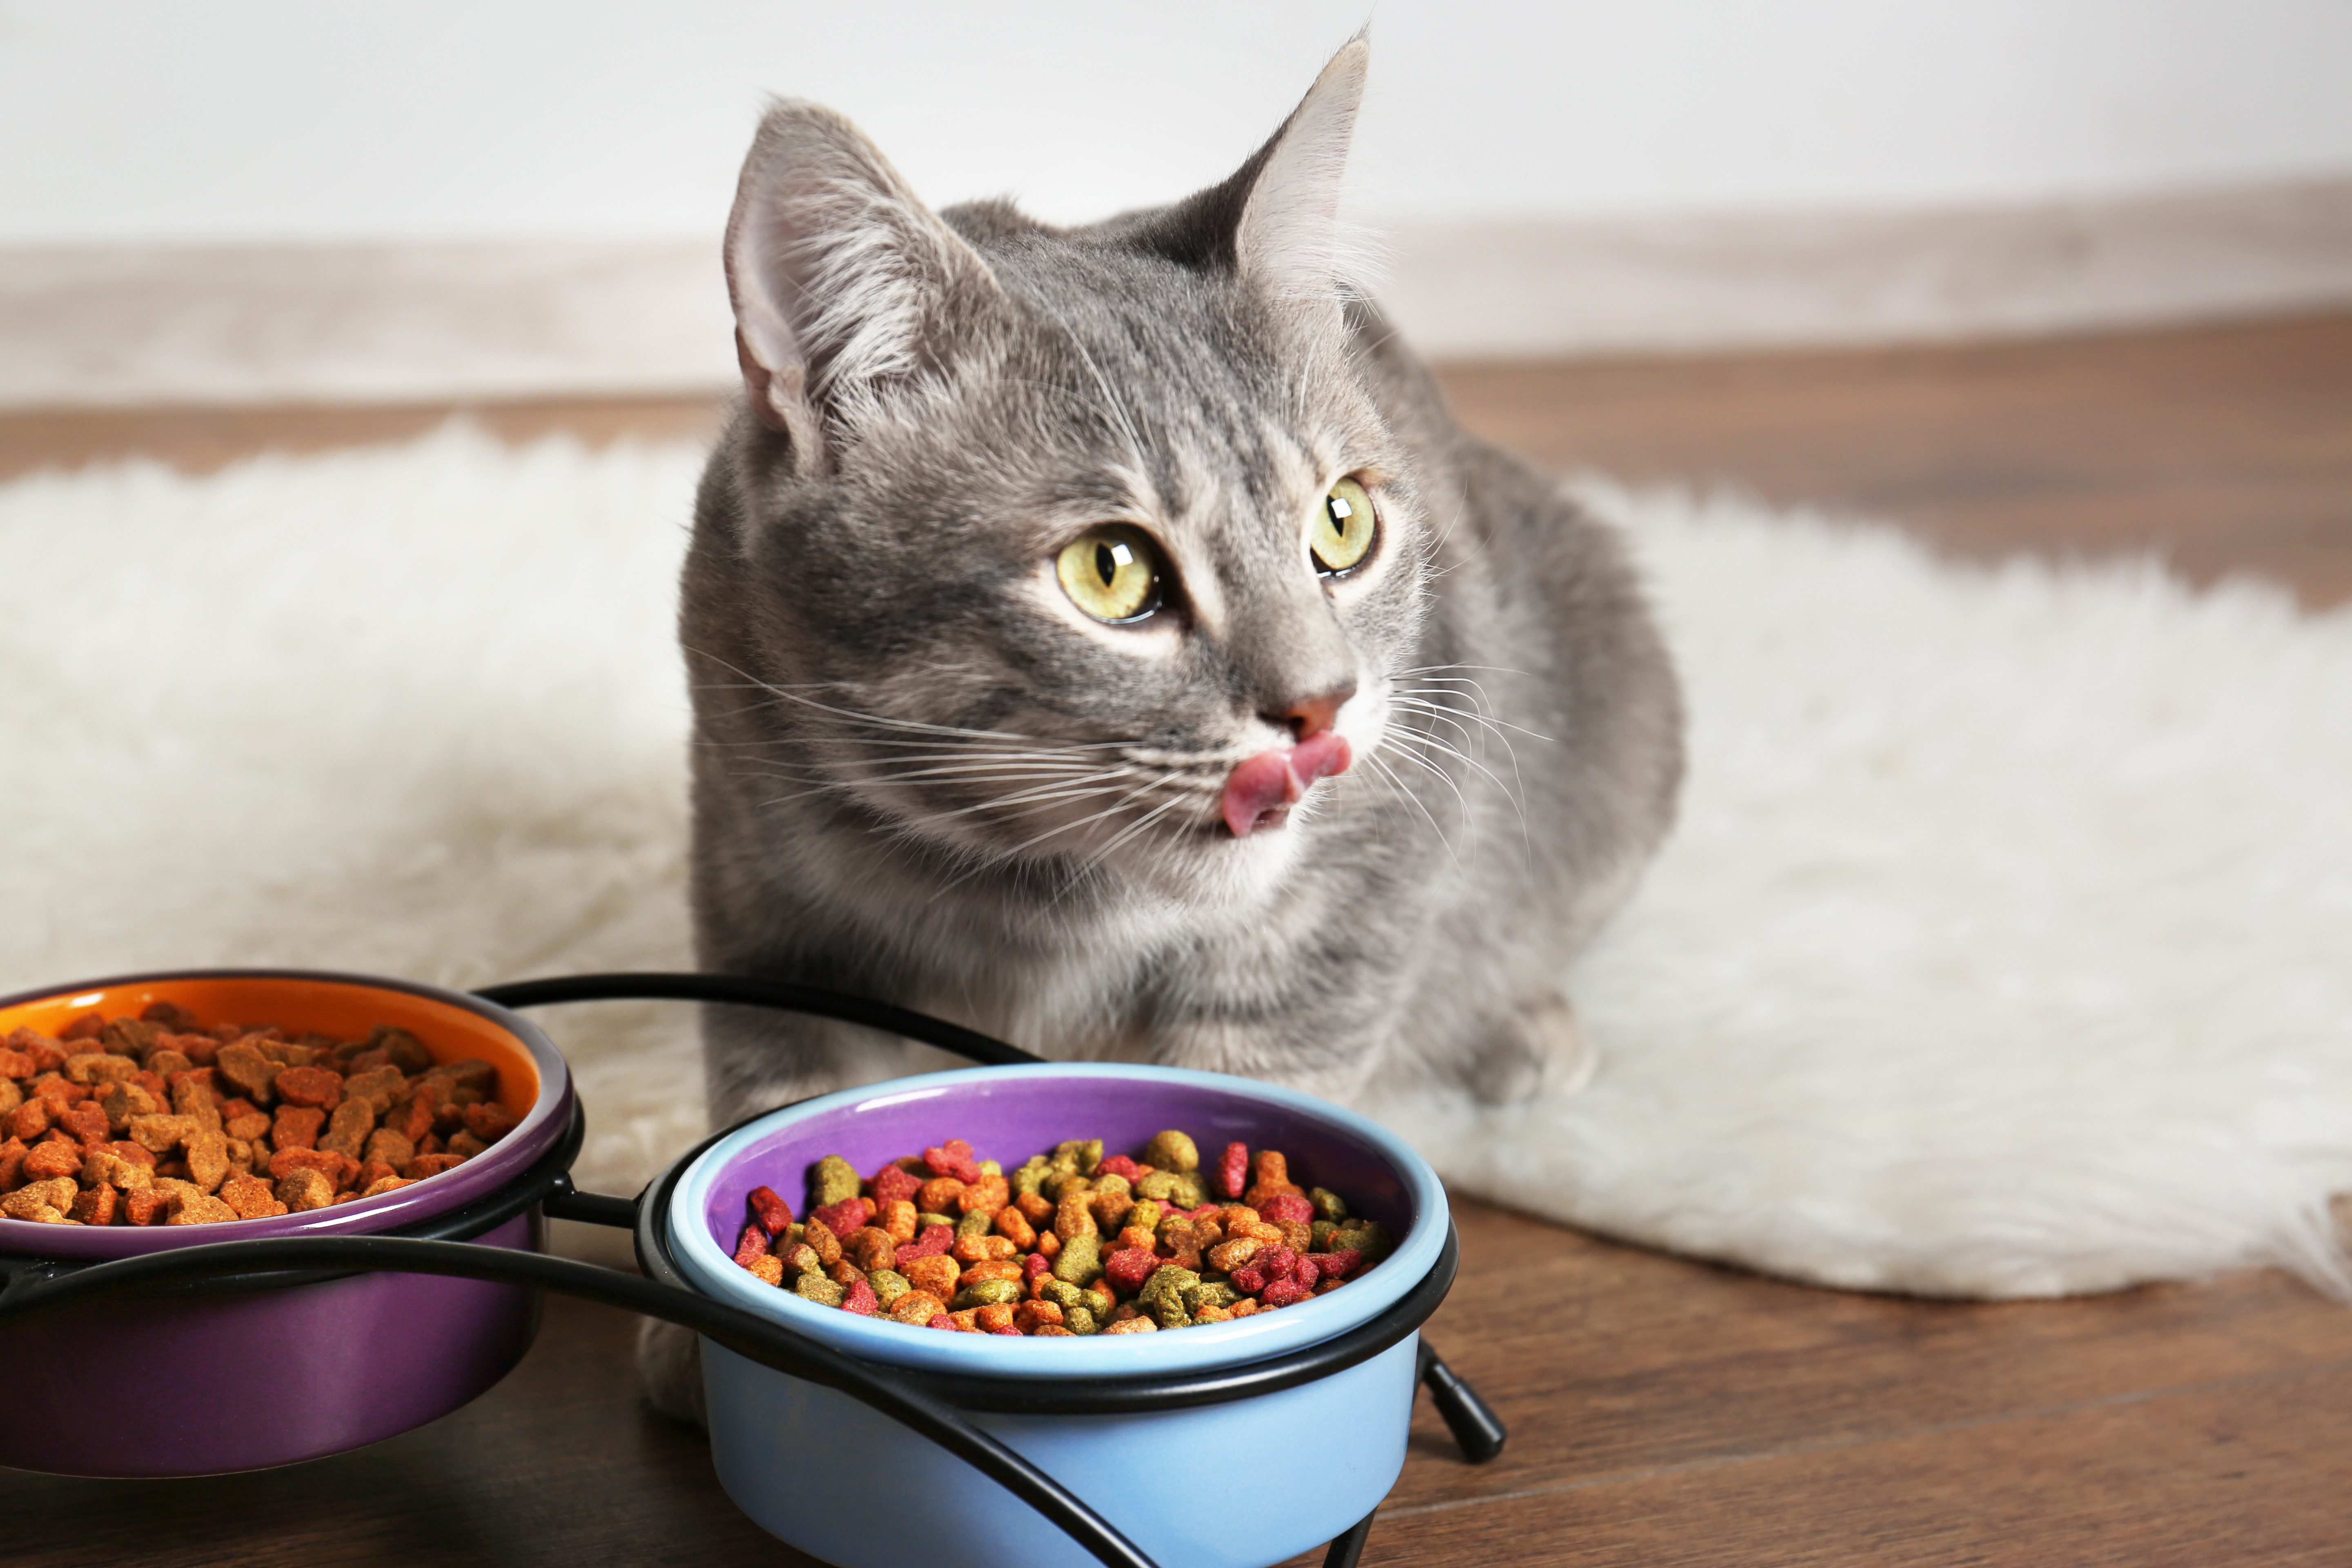 Best Dry Foods for Cats, According to